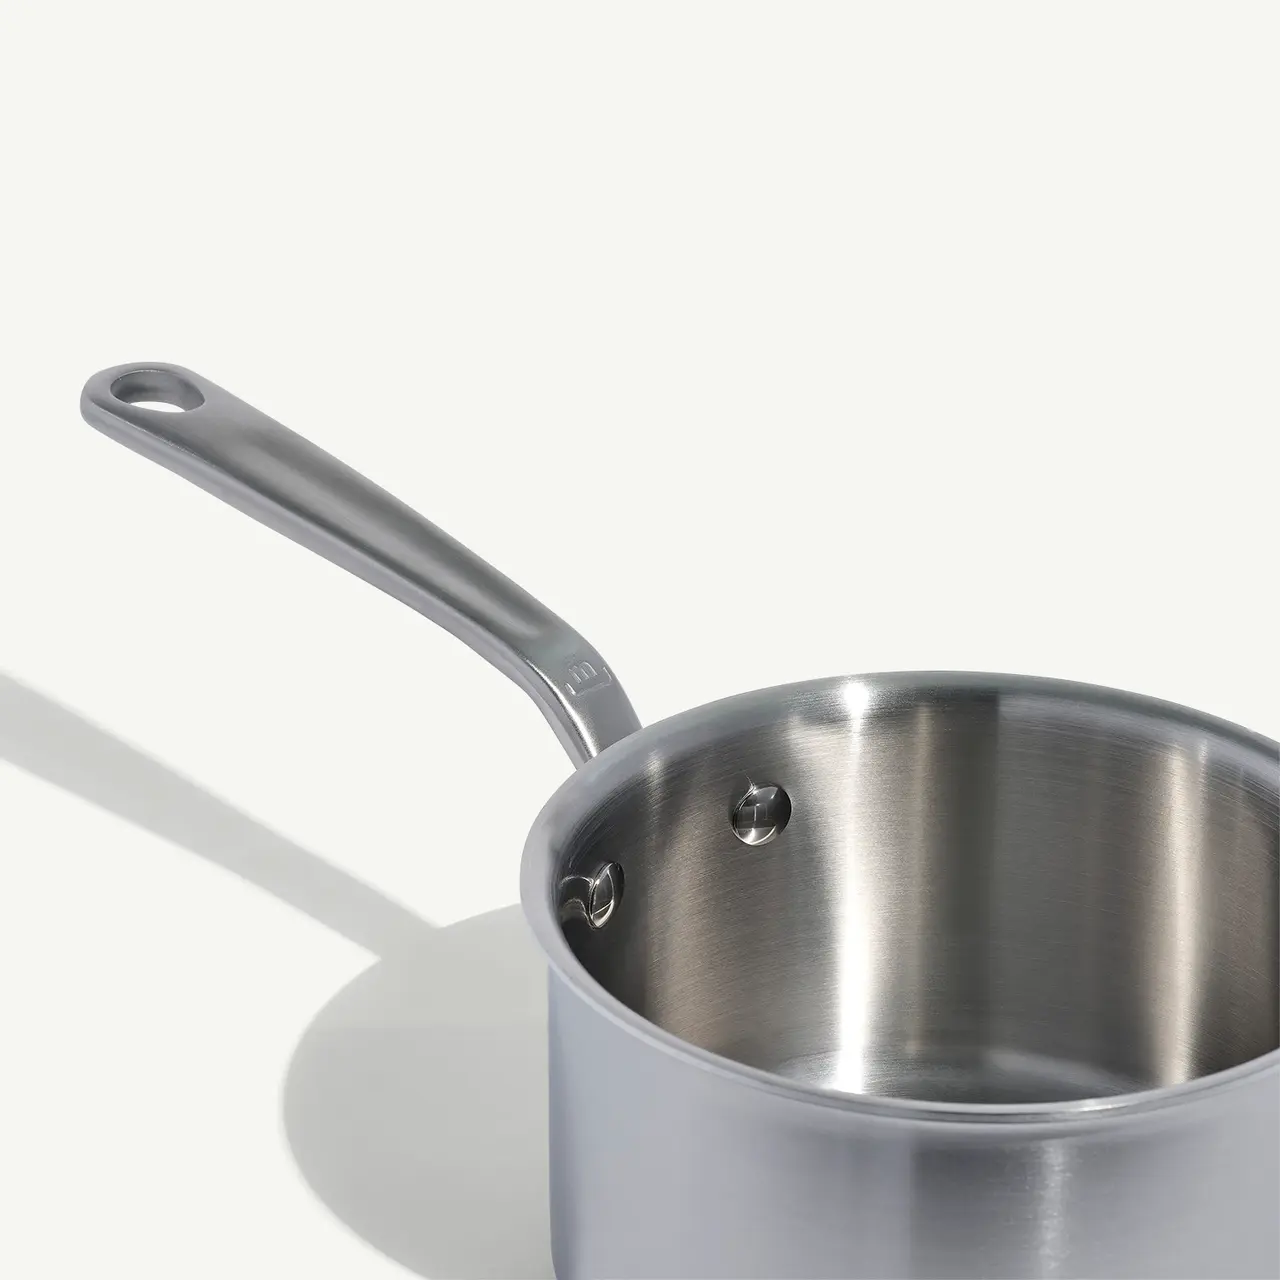 A stainless steel saucepan with a long handle is positioned against a light gray background, casting a soft shadow.